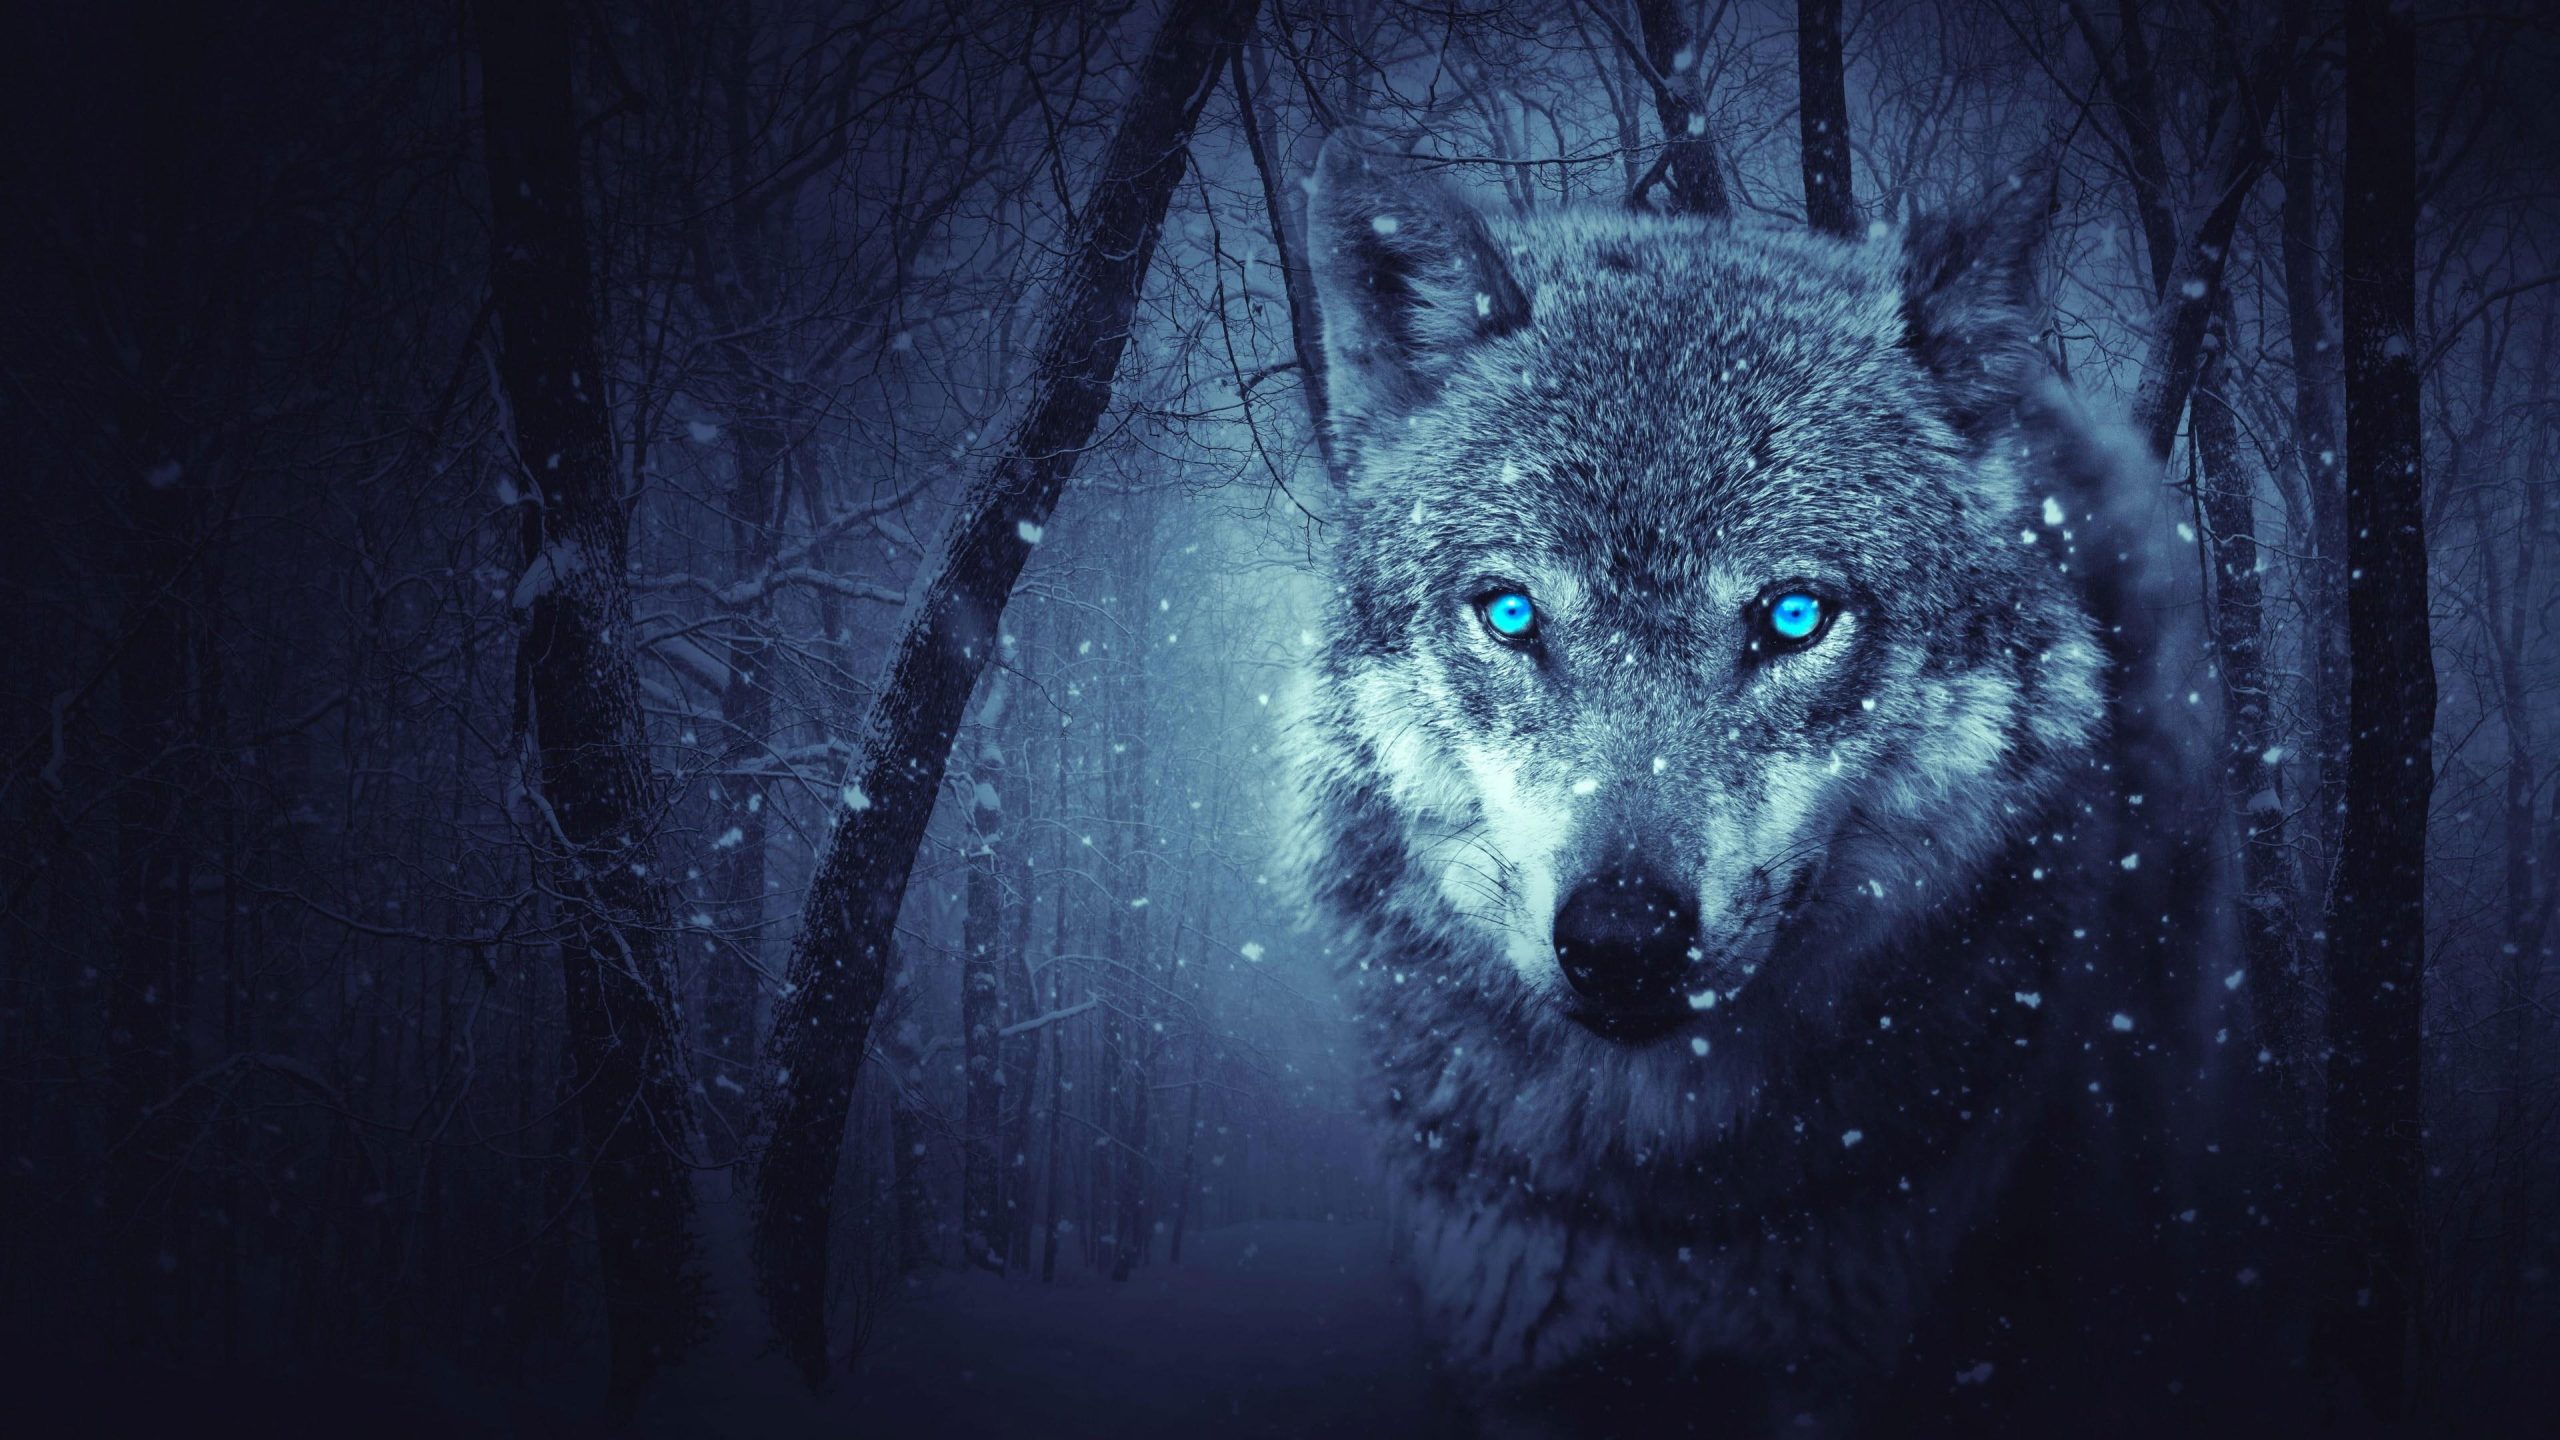 Wolf wallpaper, winter, fantasy, forest, snowing, wild animal • Wallpaper For You HD Wallpaper For Desktop & Mobile